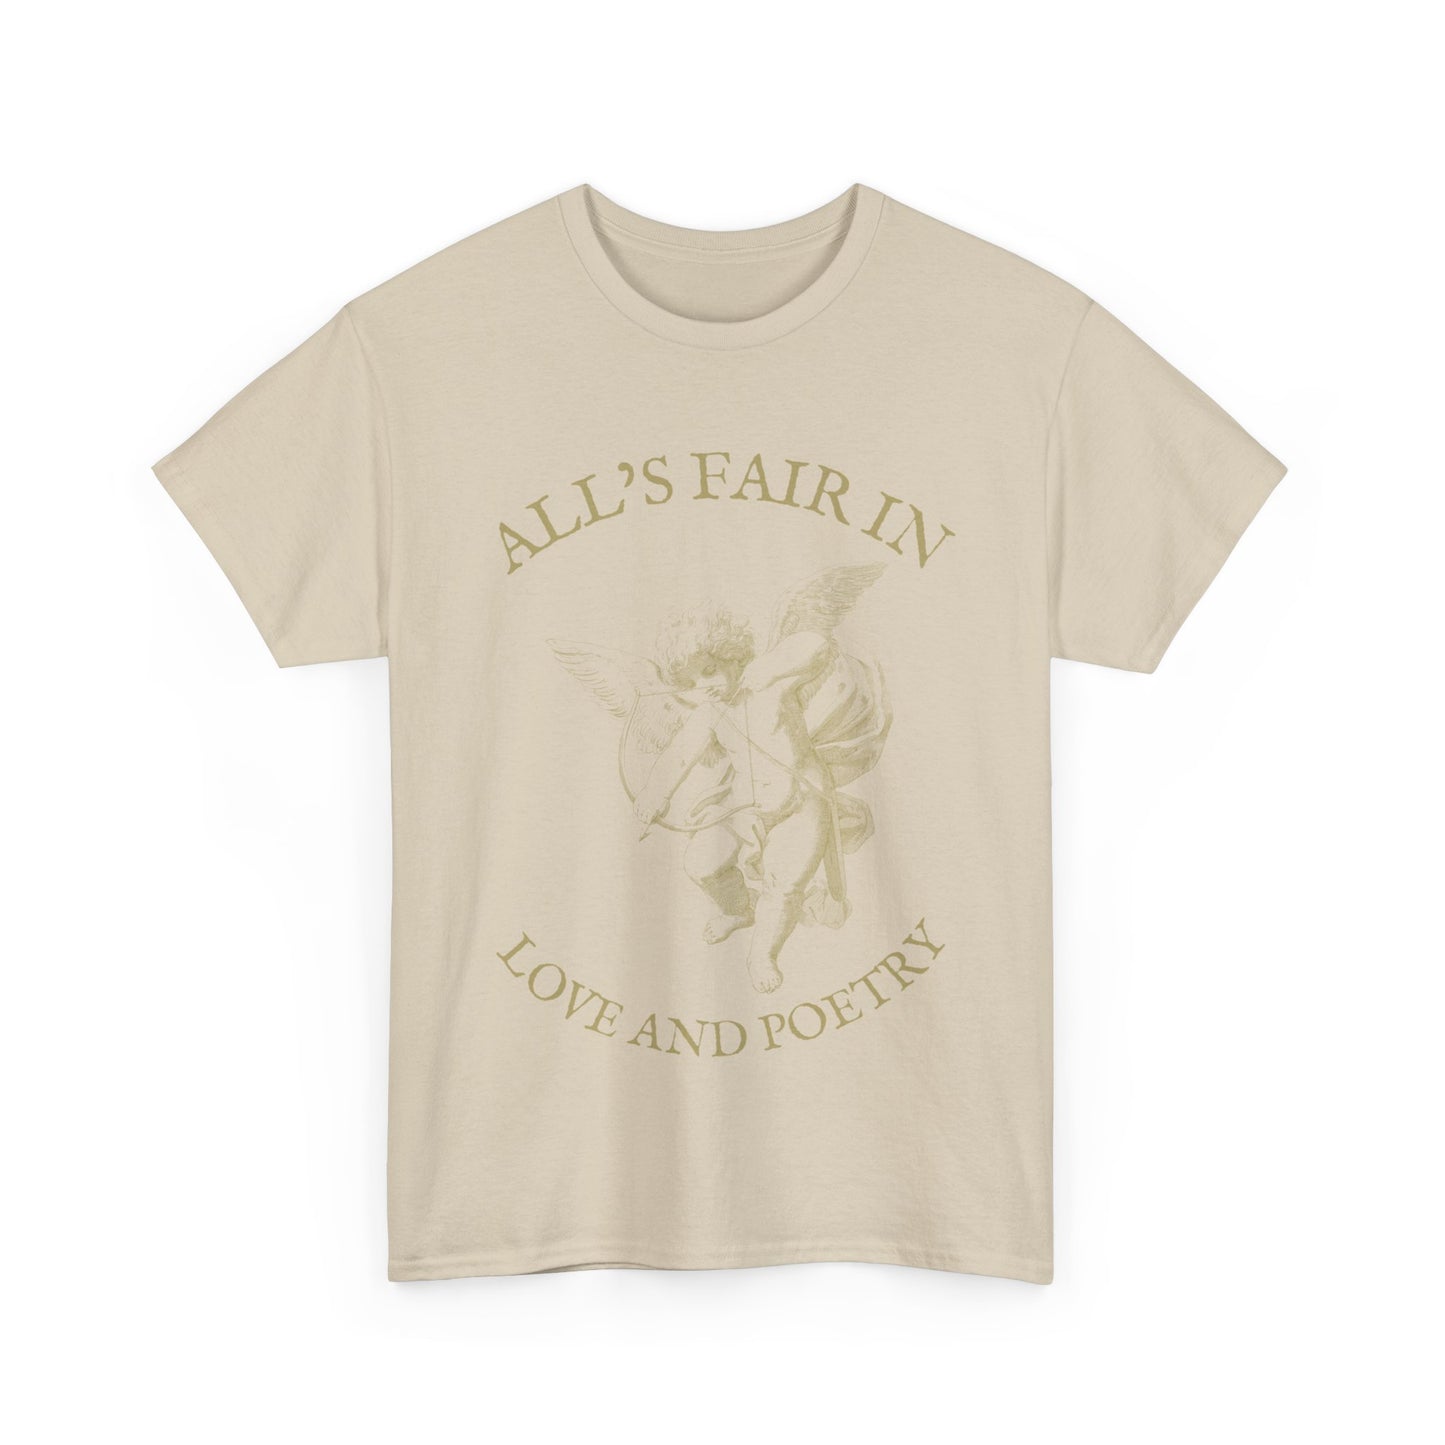 All's Fair in Love and Poetry T-Shirt